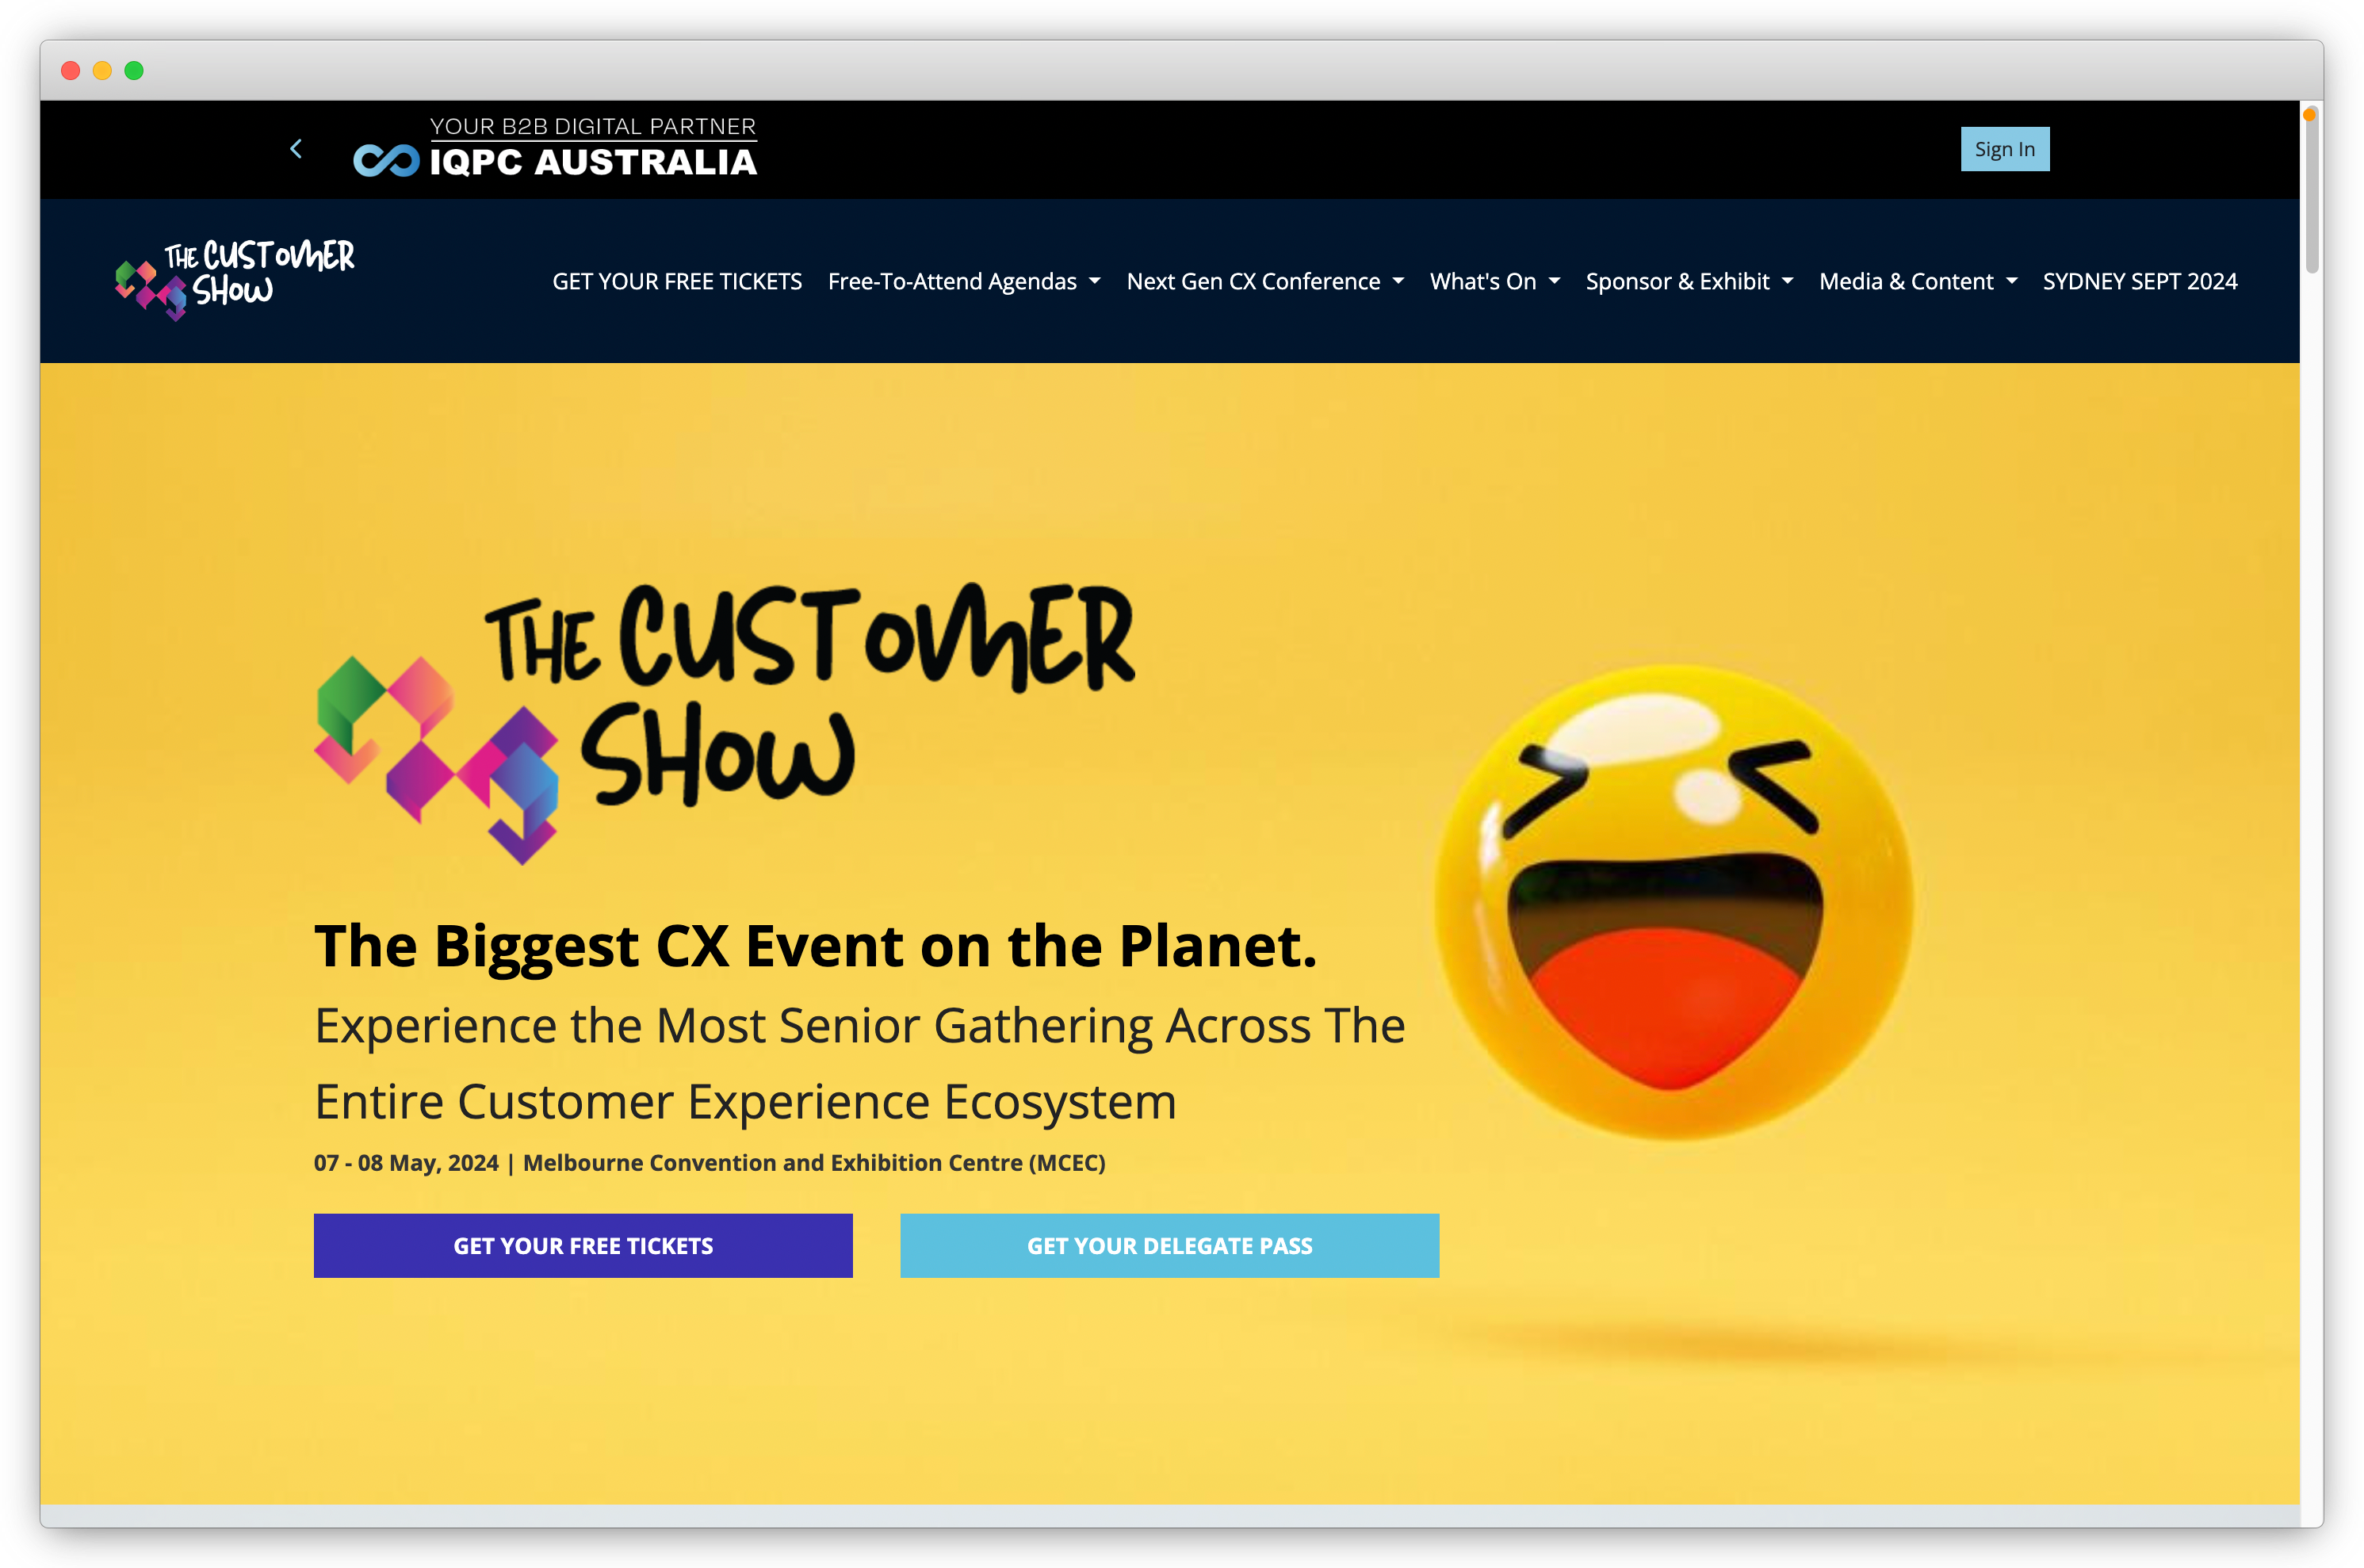 CX Events 2024 - The Customer Show Melbourne